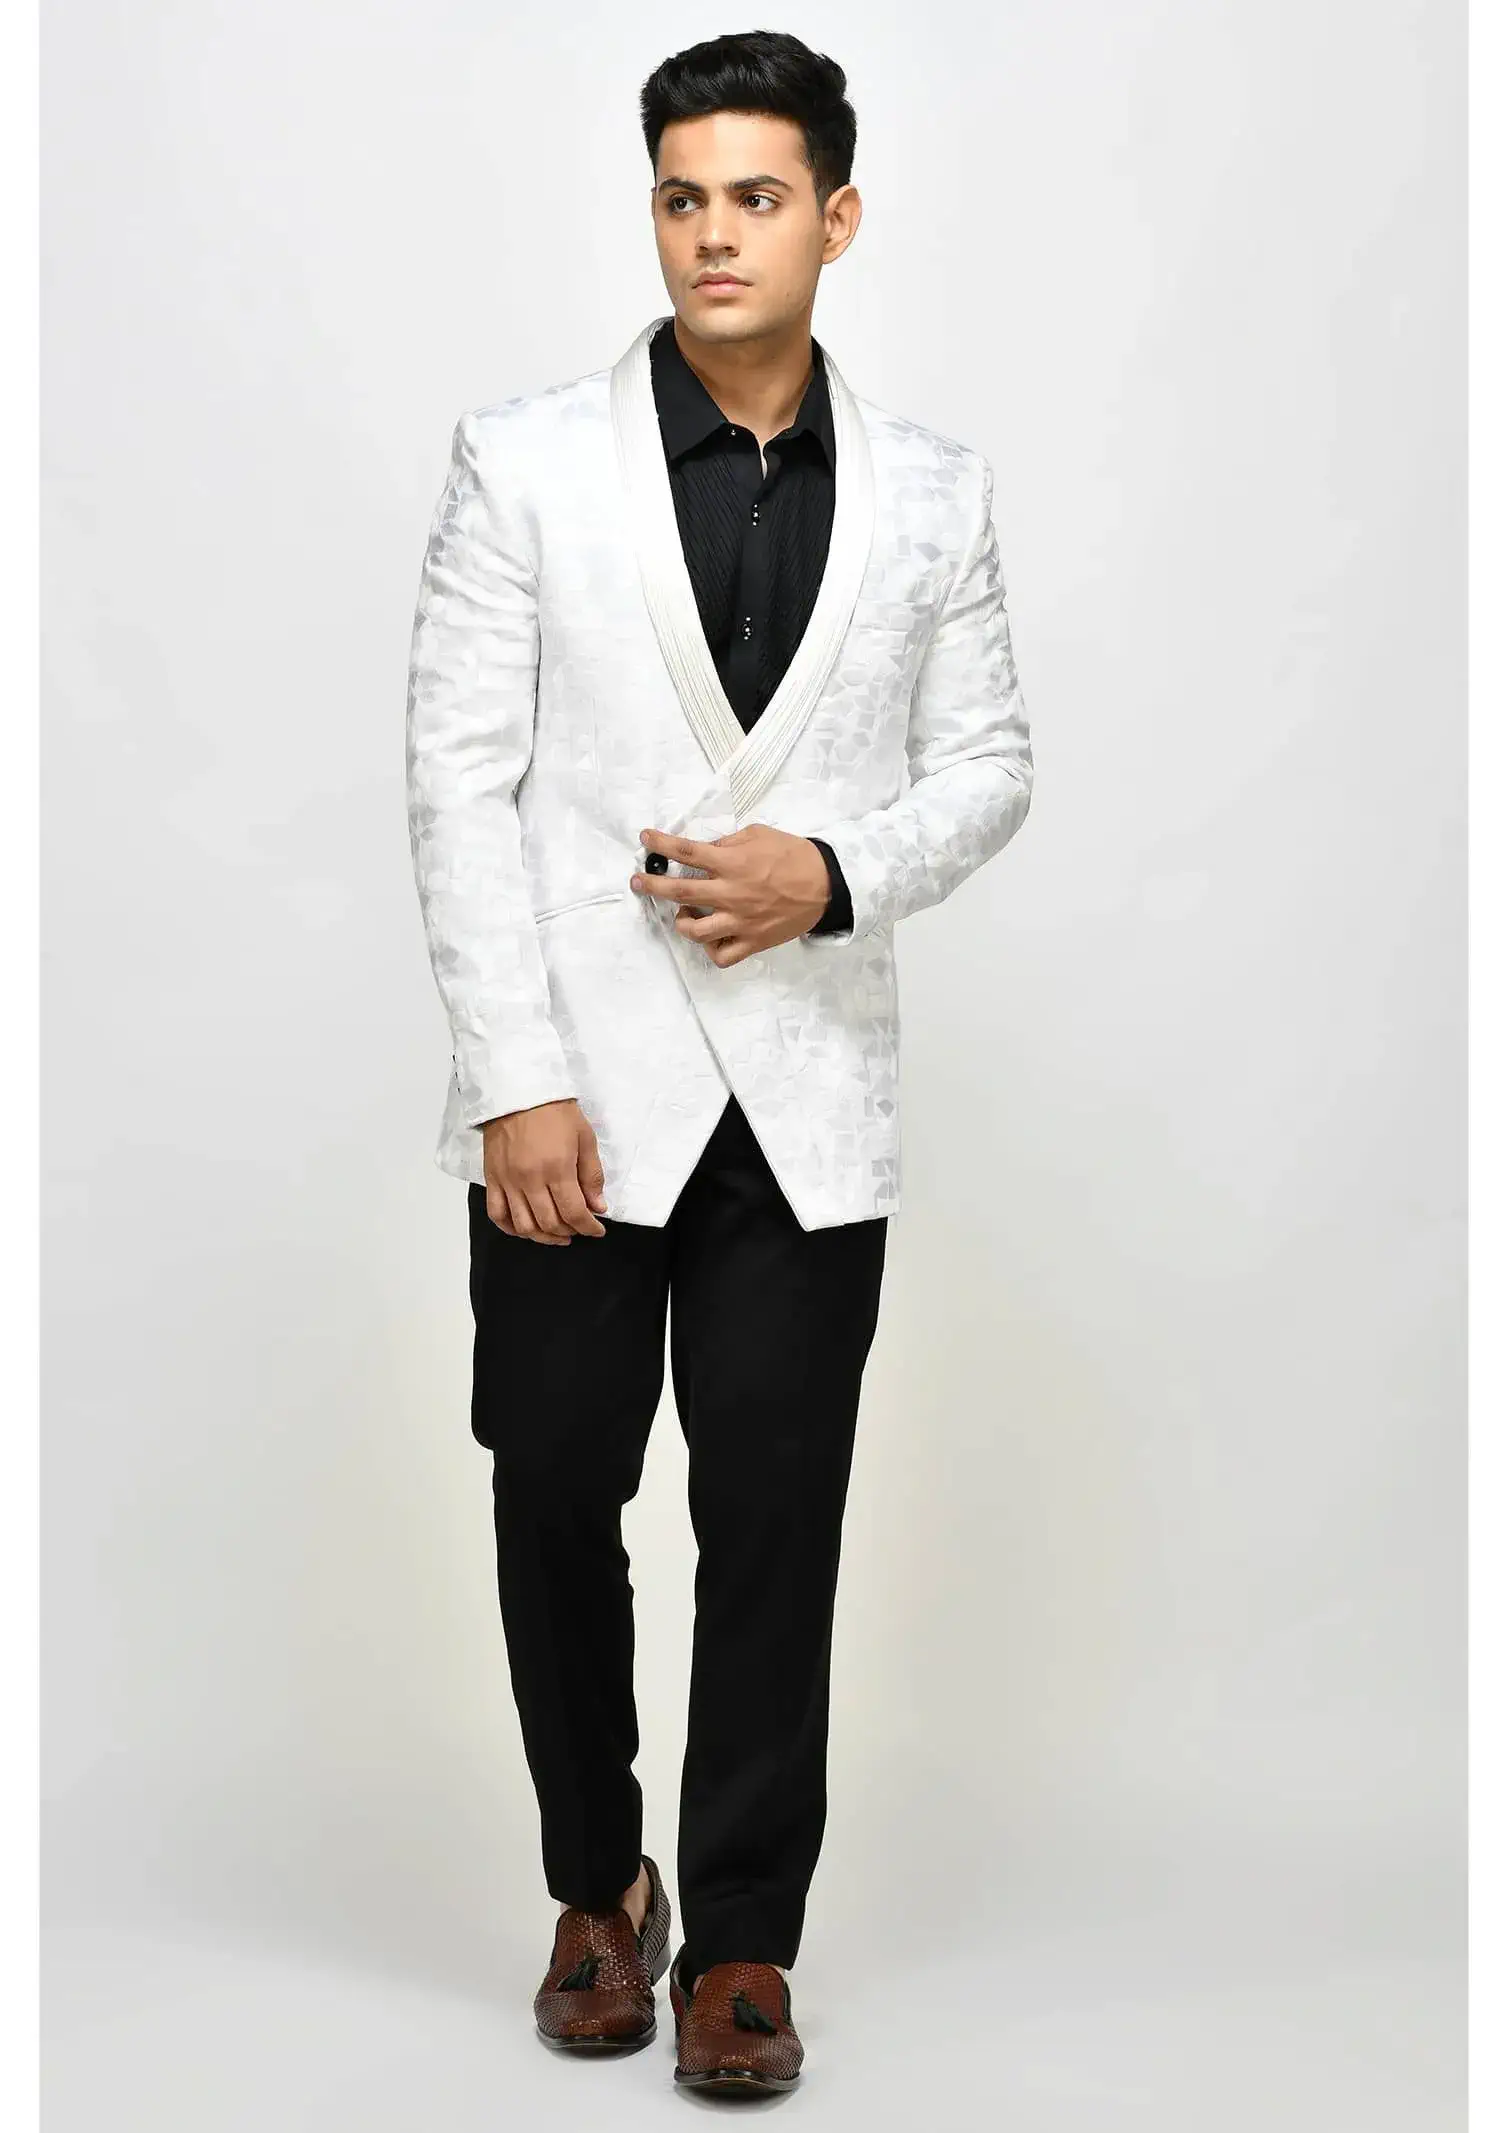 White and Black Woven Design Suit Set - Indian Groom Outfit